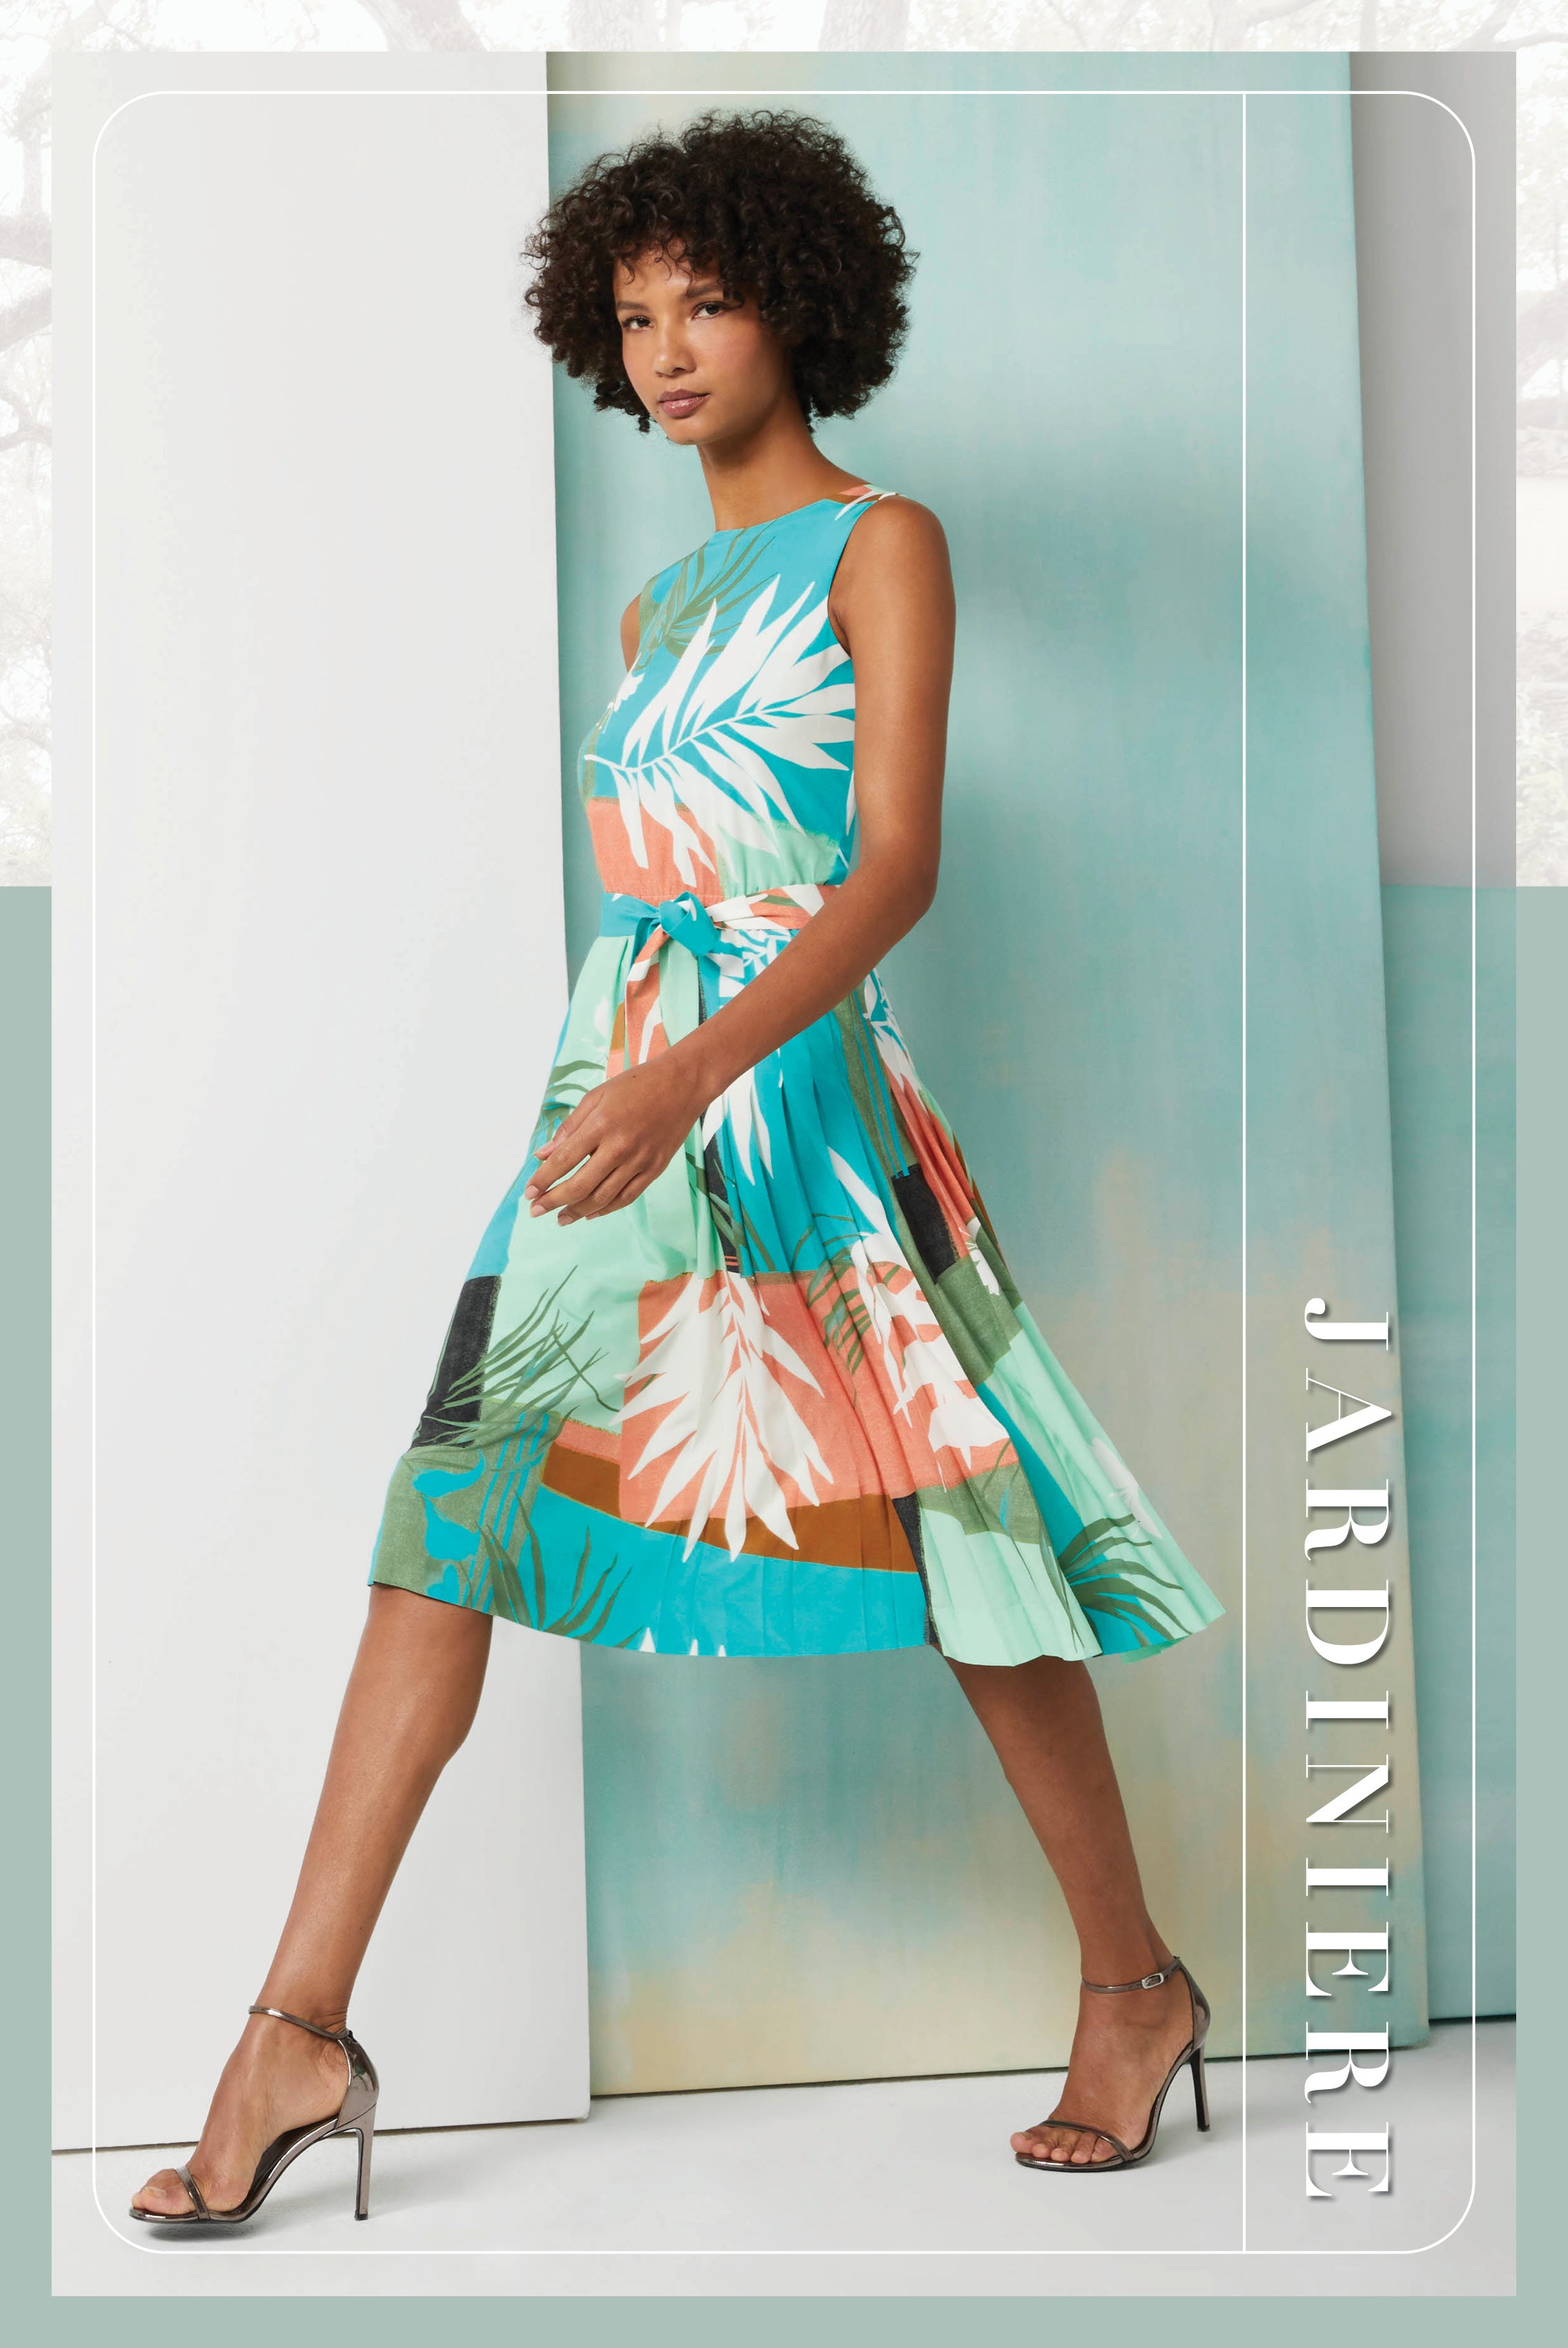 Photo of a model wearing the Jardiniere dress, which is a tropical-print, stretch silk pleated dress.